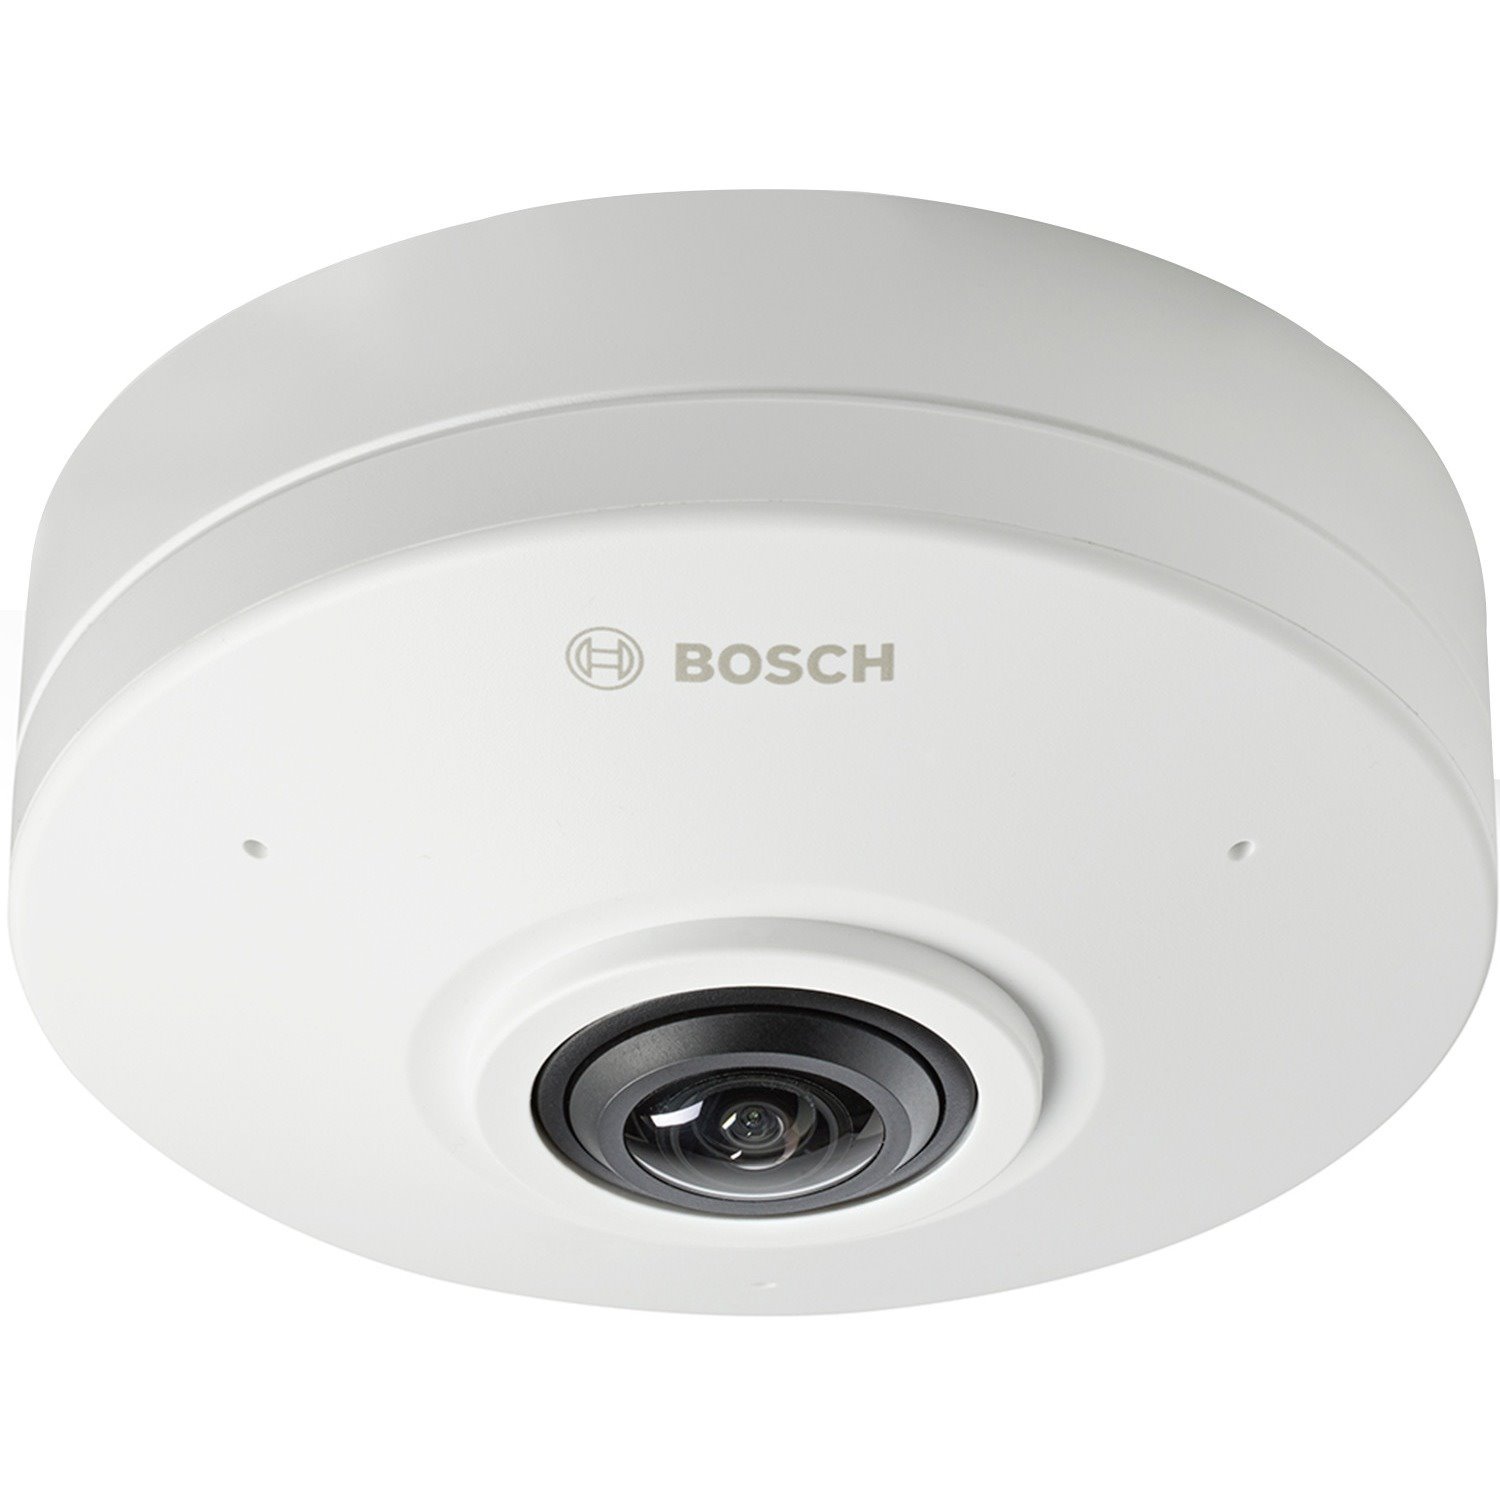 Bosch FlexiDome 6 Megapixel Indoor/Outdoor Full HD Network Camera - Colour - Dome - White